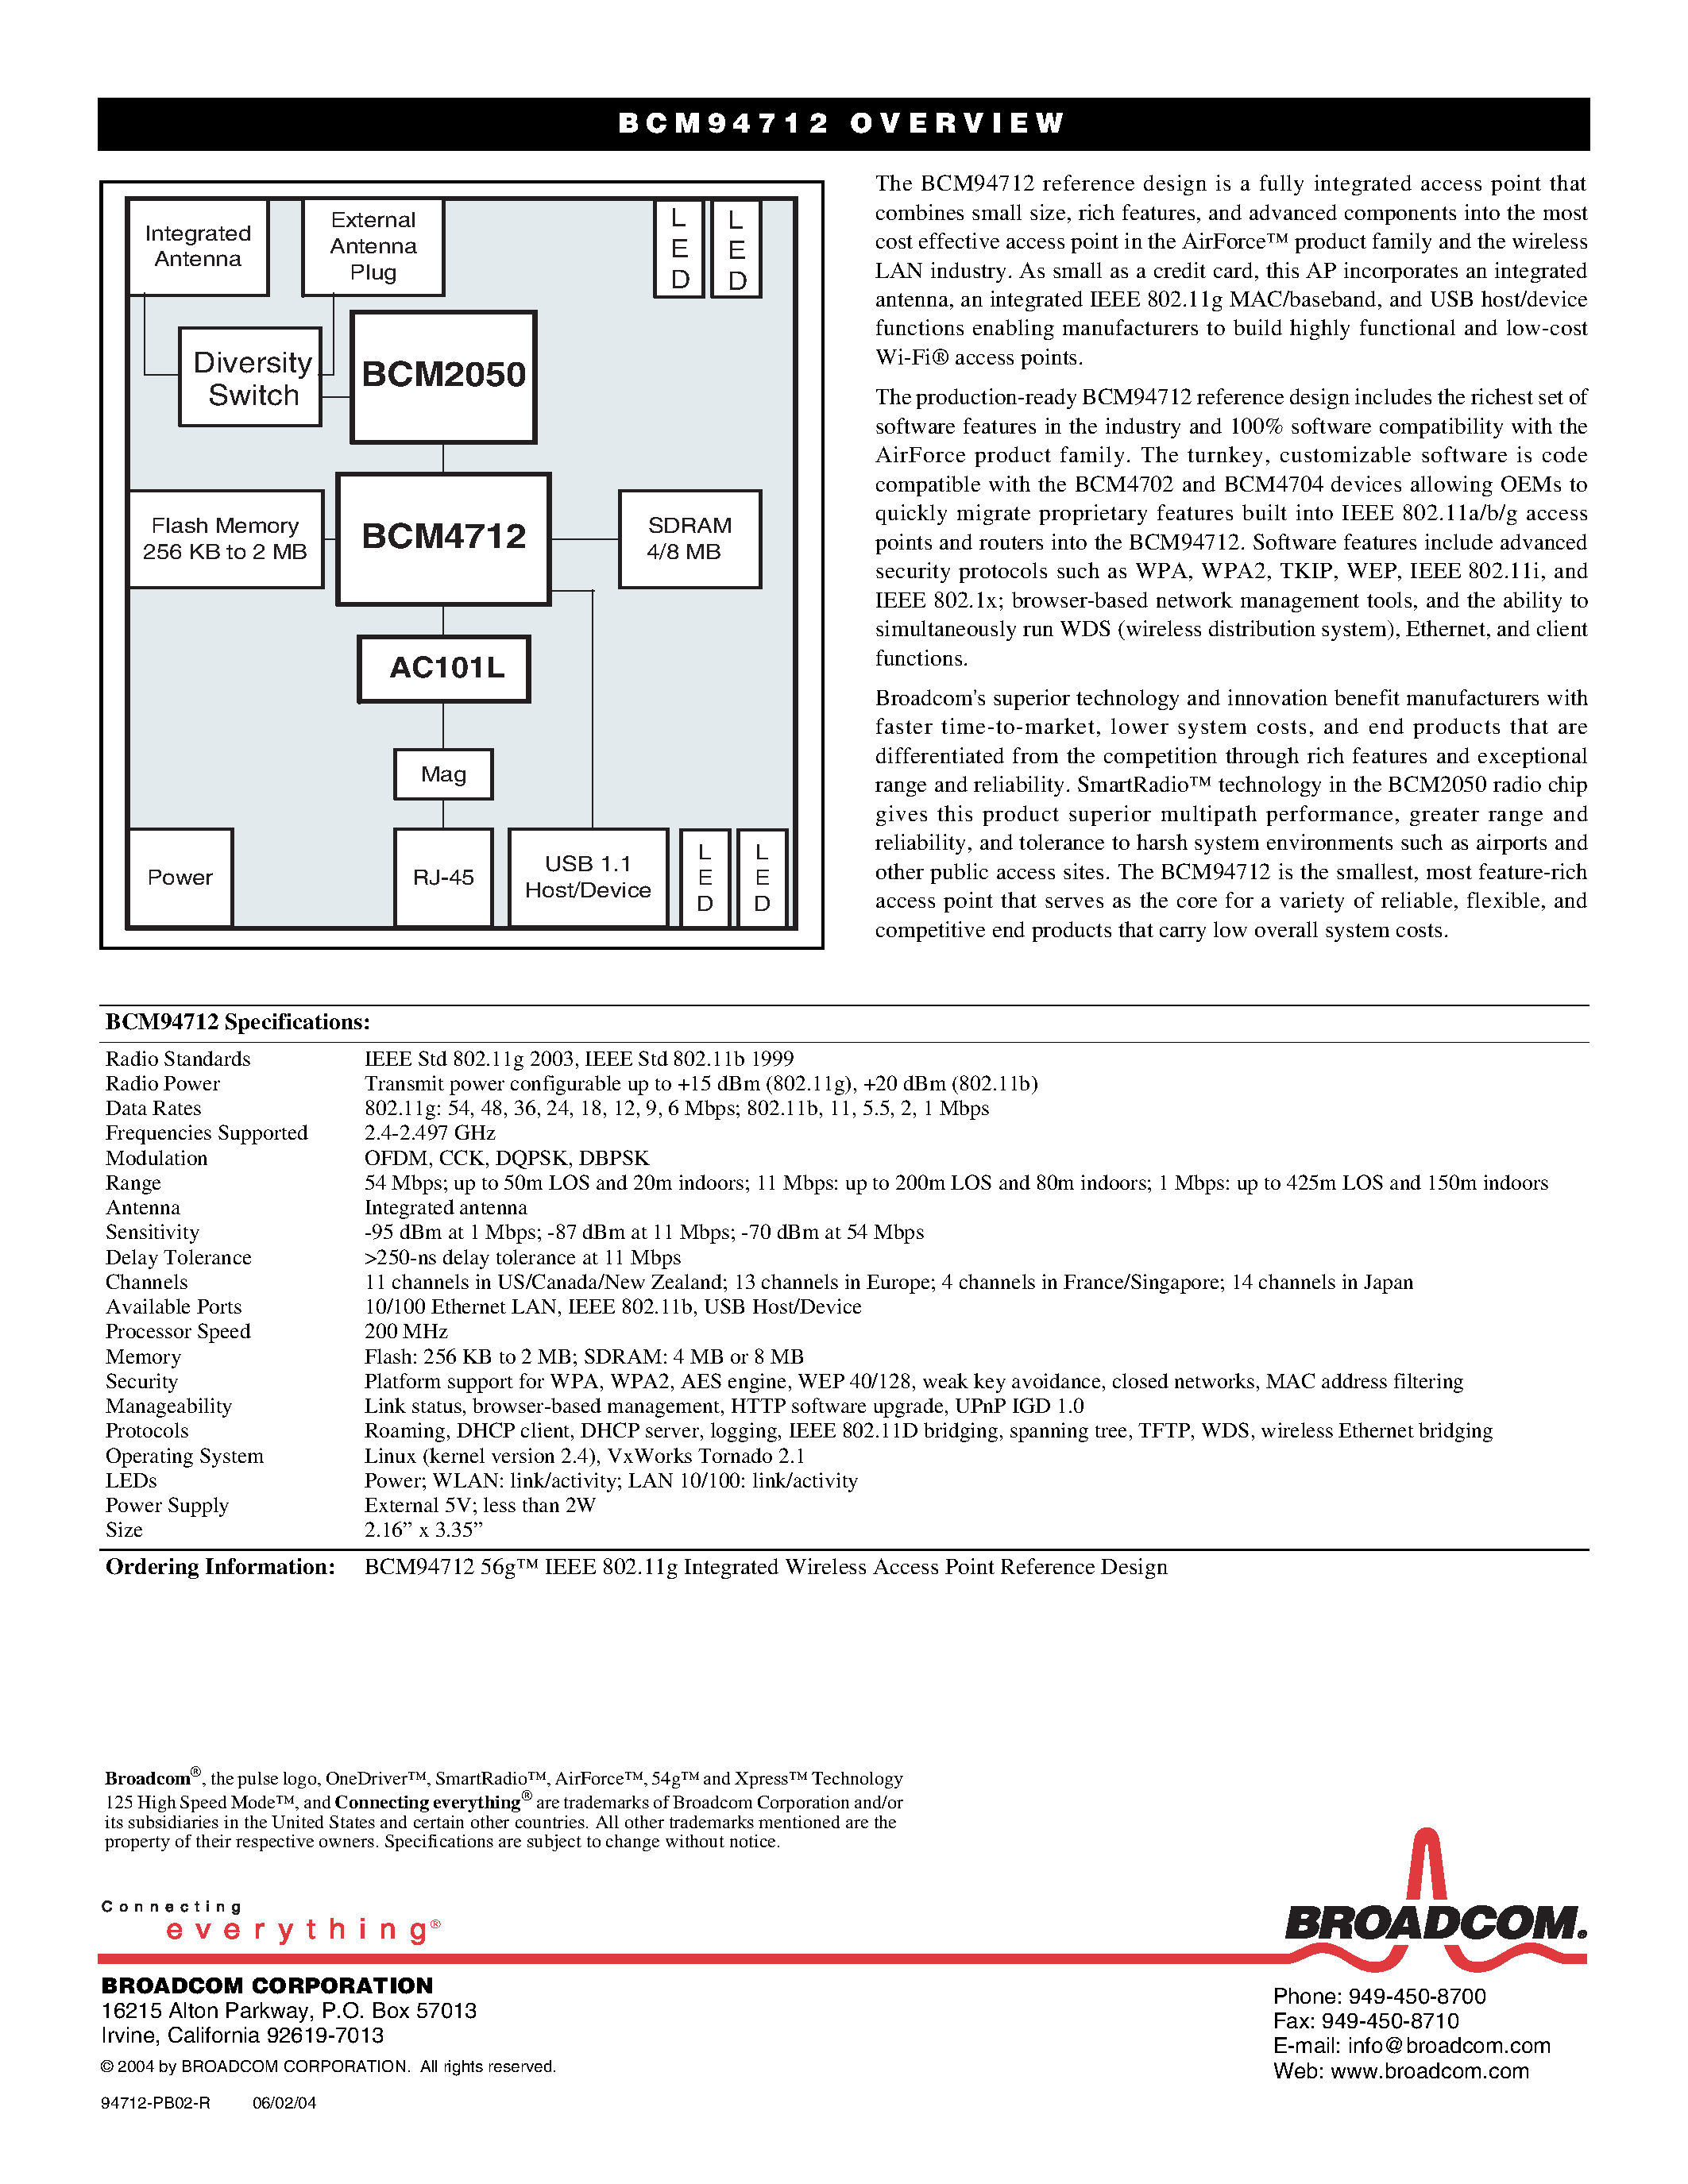 Datasheet BCM4712 - AIRFORCE INTERGRATED WIRELESS ACESS POINT page 2